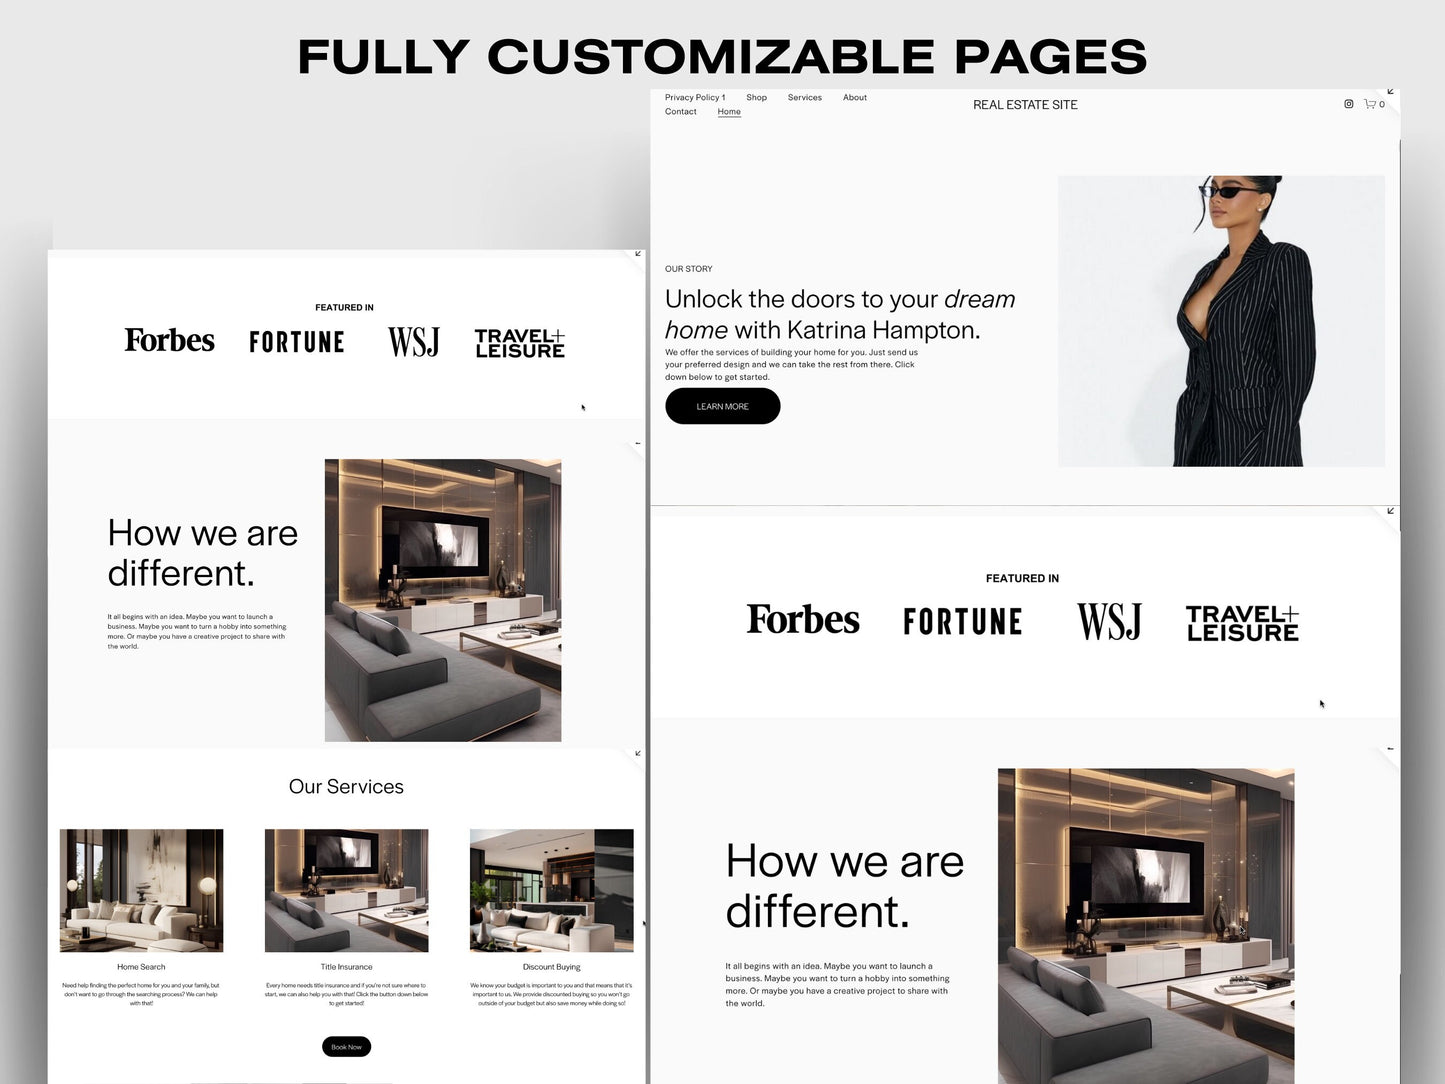 Aesthetic Real Estate Squarespace Website Template, Website Template Squarespace,D.I.Y Website Design,Squarespace Template Editable